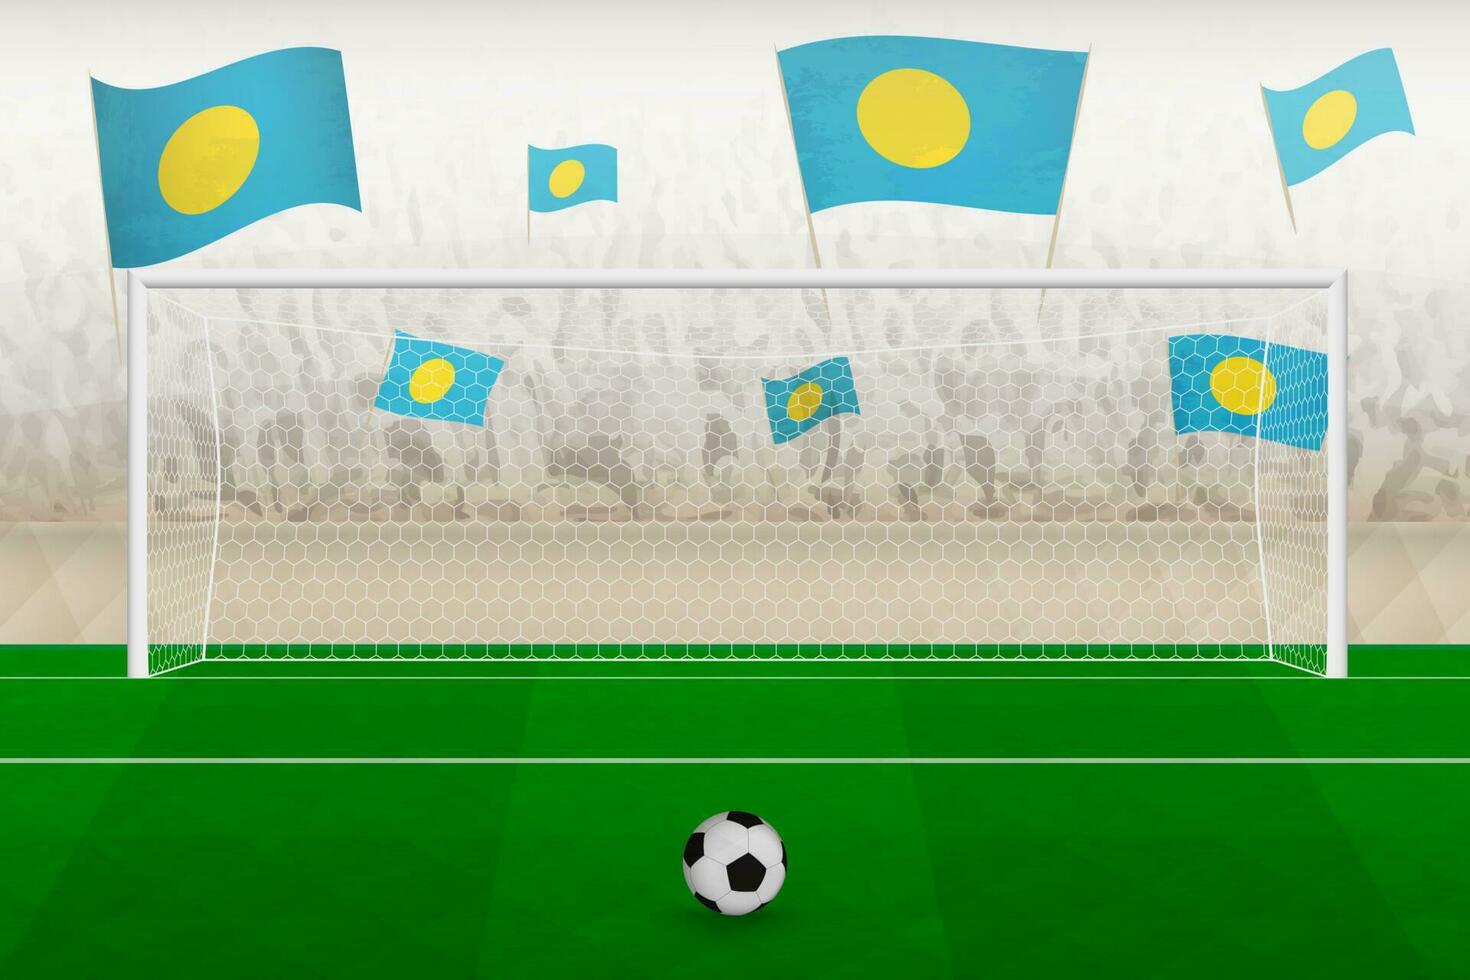 Palau football team fans with flags of Palau cheering on stadium, penalty kick concept in a soccer match. vector